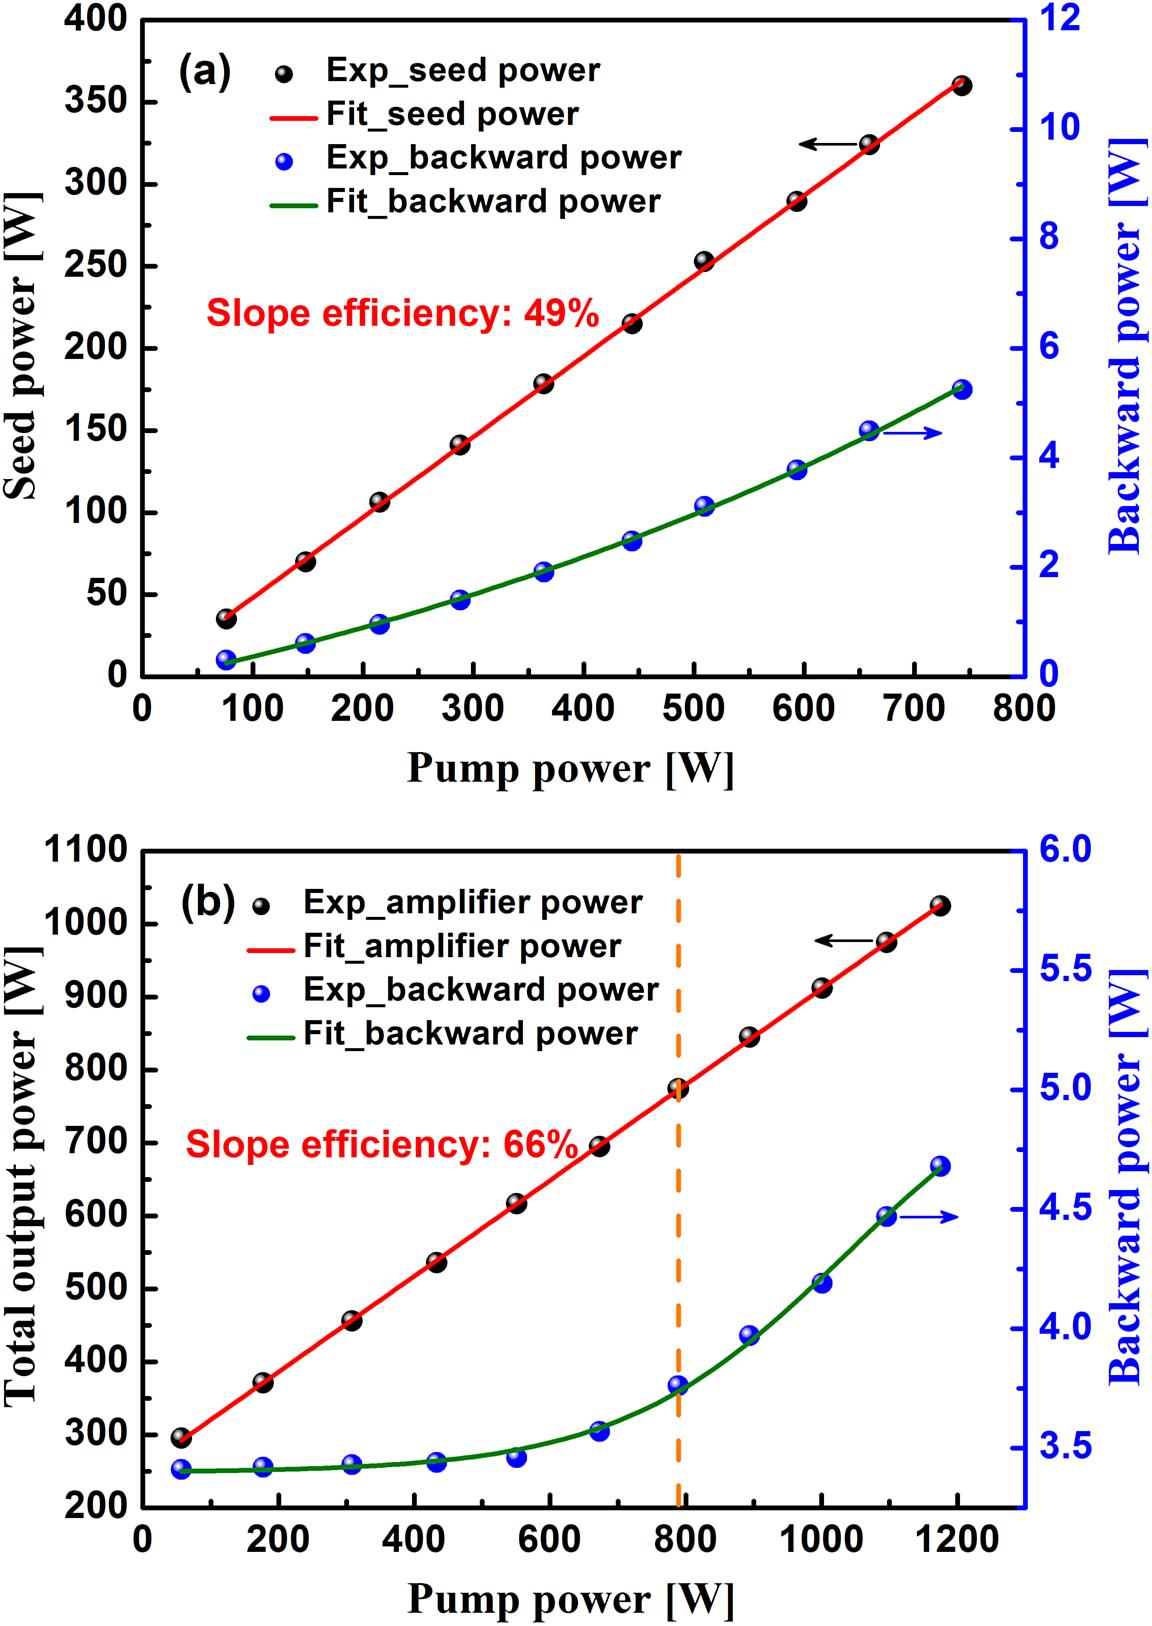 (a) Seed powers and backward powers under different pump powers. (b) Total output powers and backward powers under different pump powers at the seed power of 260 W.